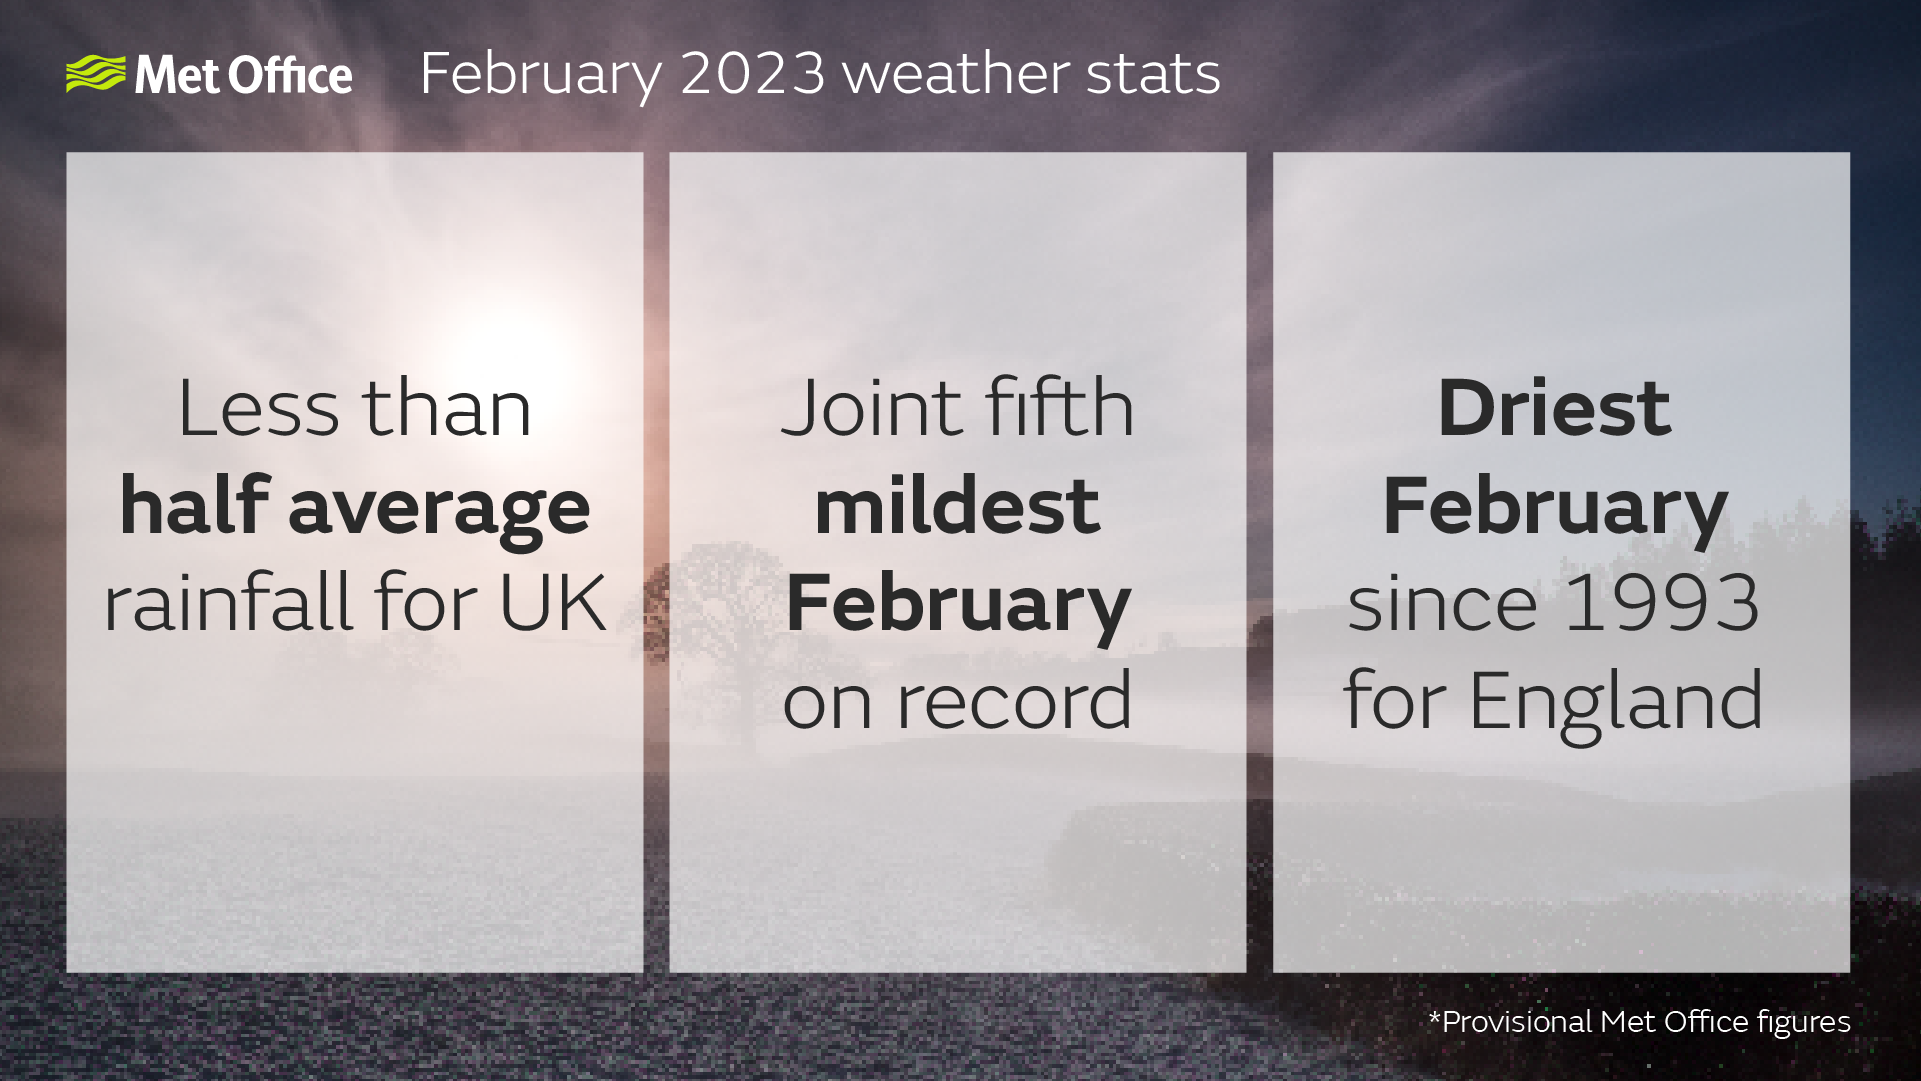 February 2023 weather stats. Less than half average rainfall for UK. - Joint fifth mildest February on record - Driest February since 1993 for England.